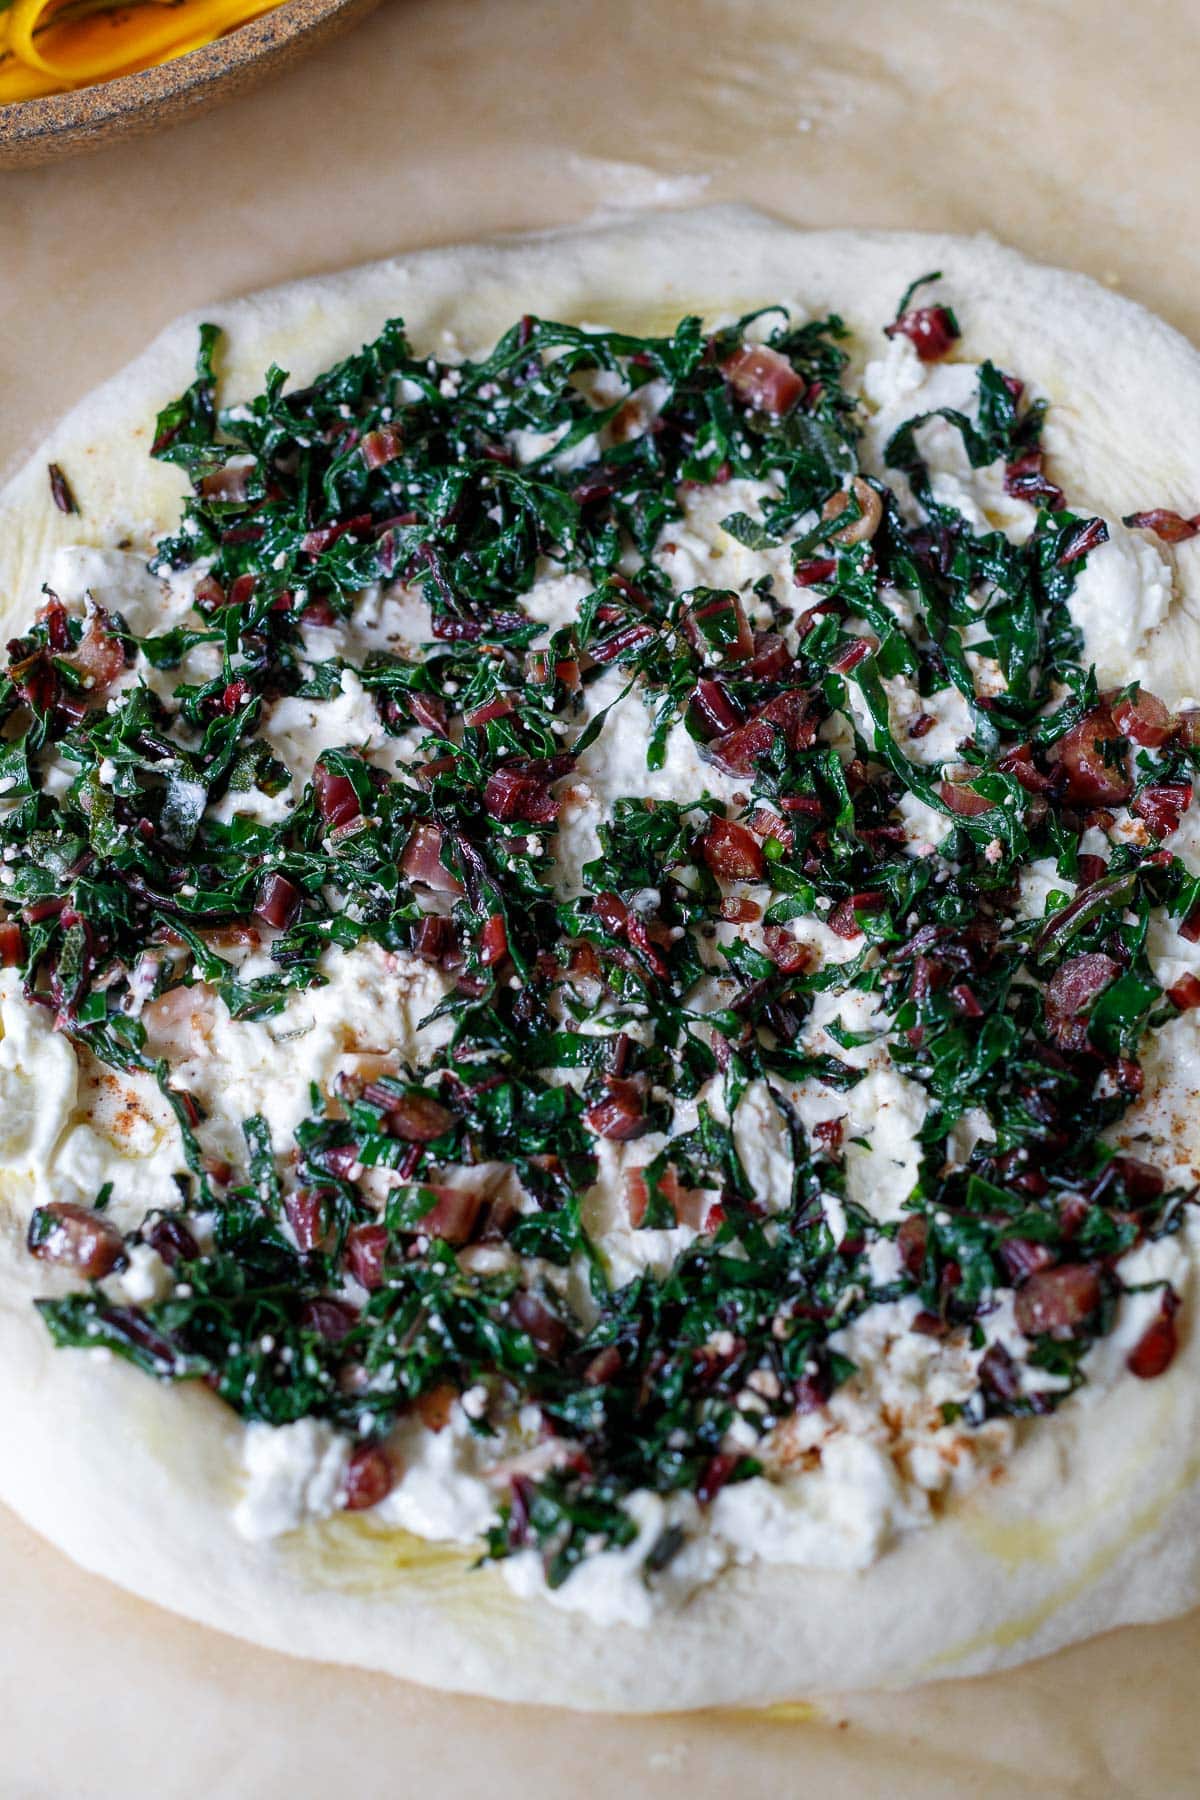 pizza dough rolled out with burrata cheese and wilted swiss chard on top